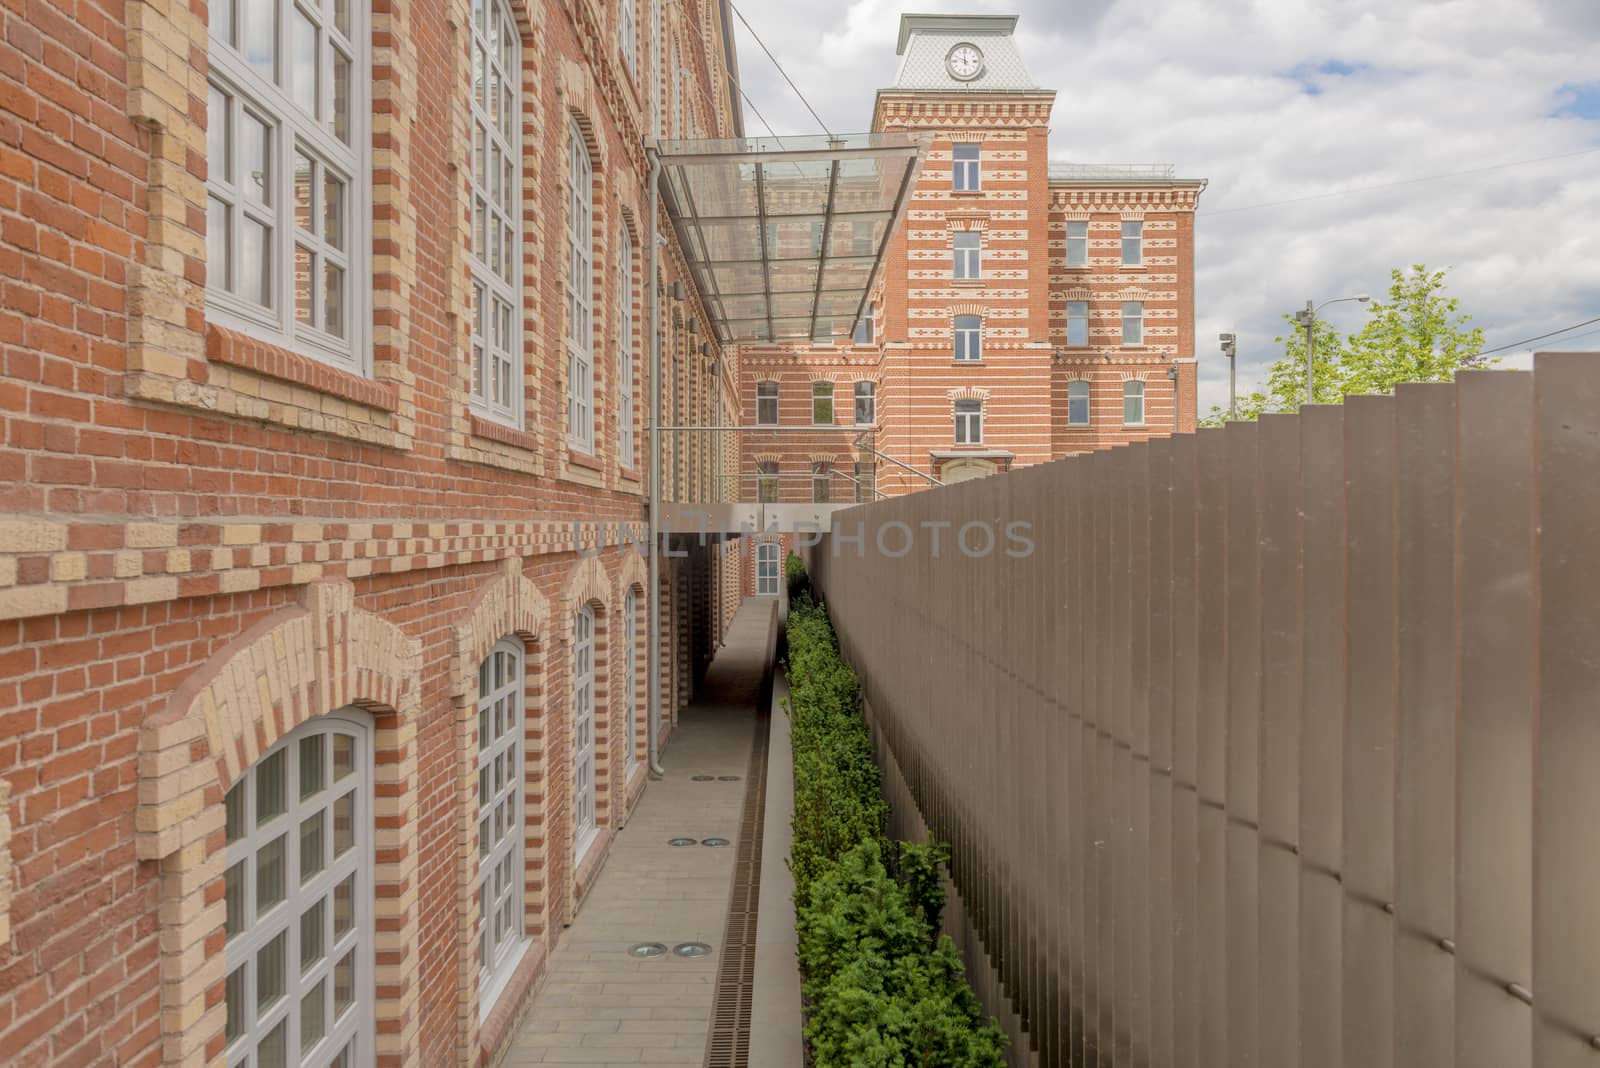 Facade of an old office building of red brick by rogkoff